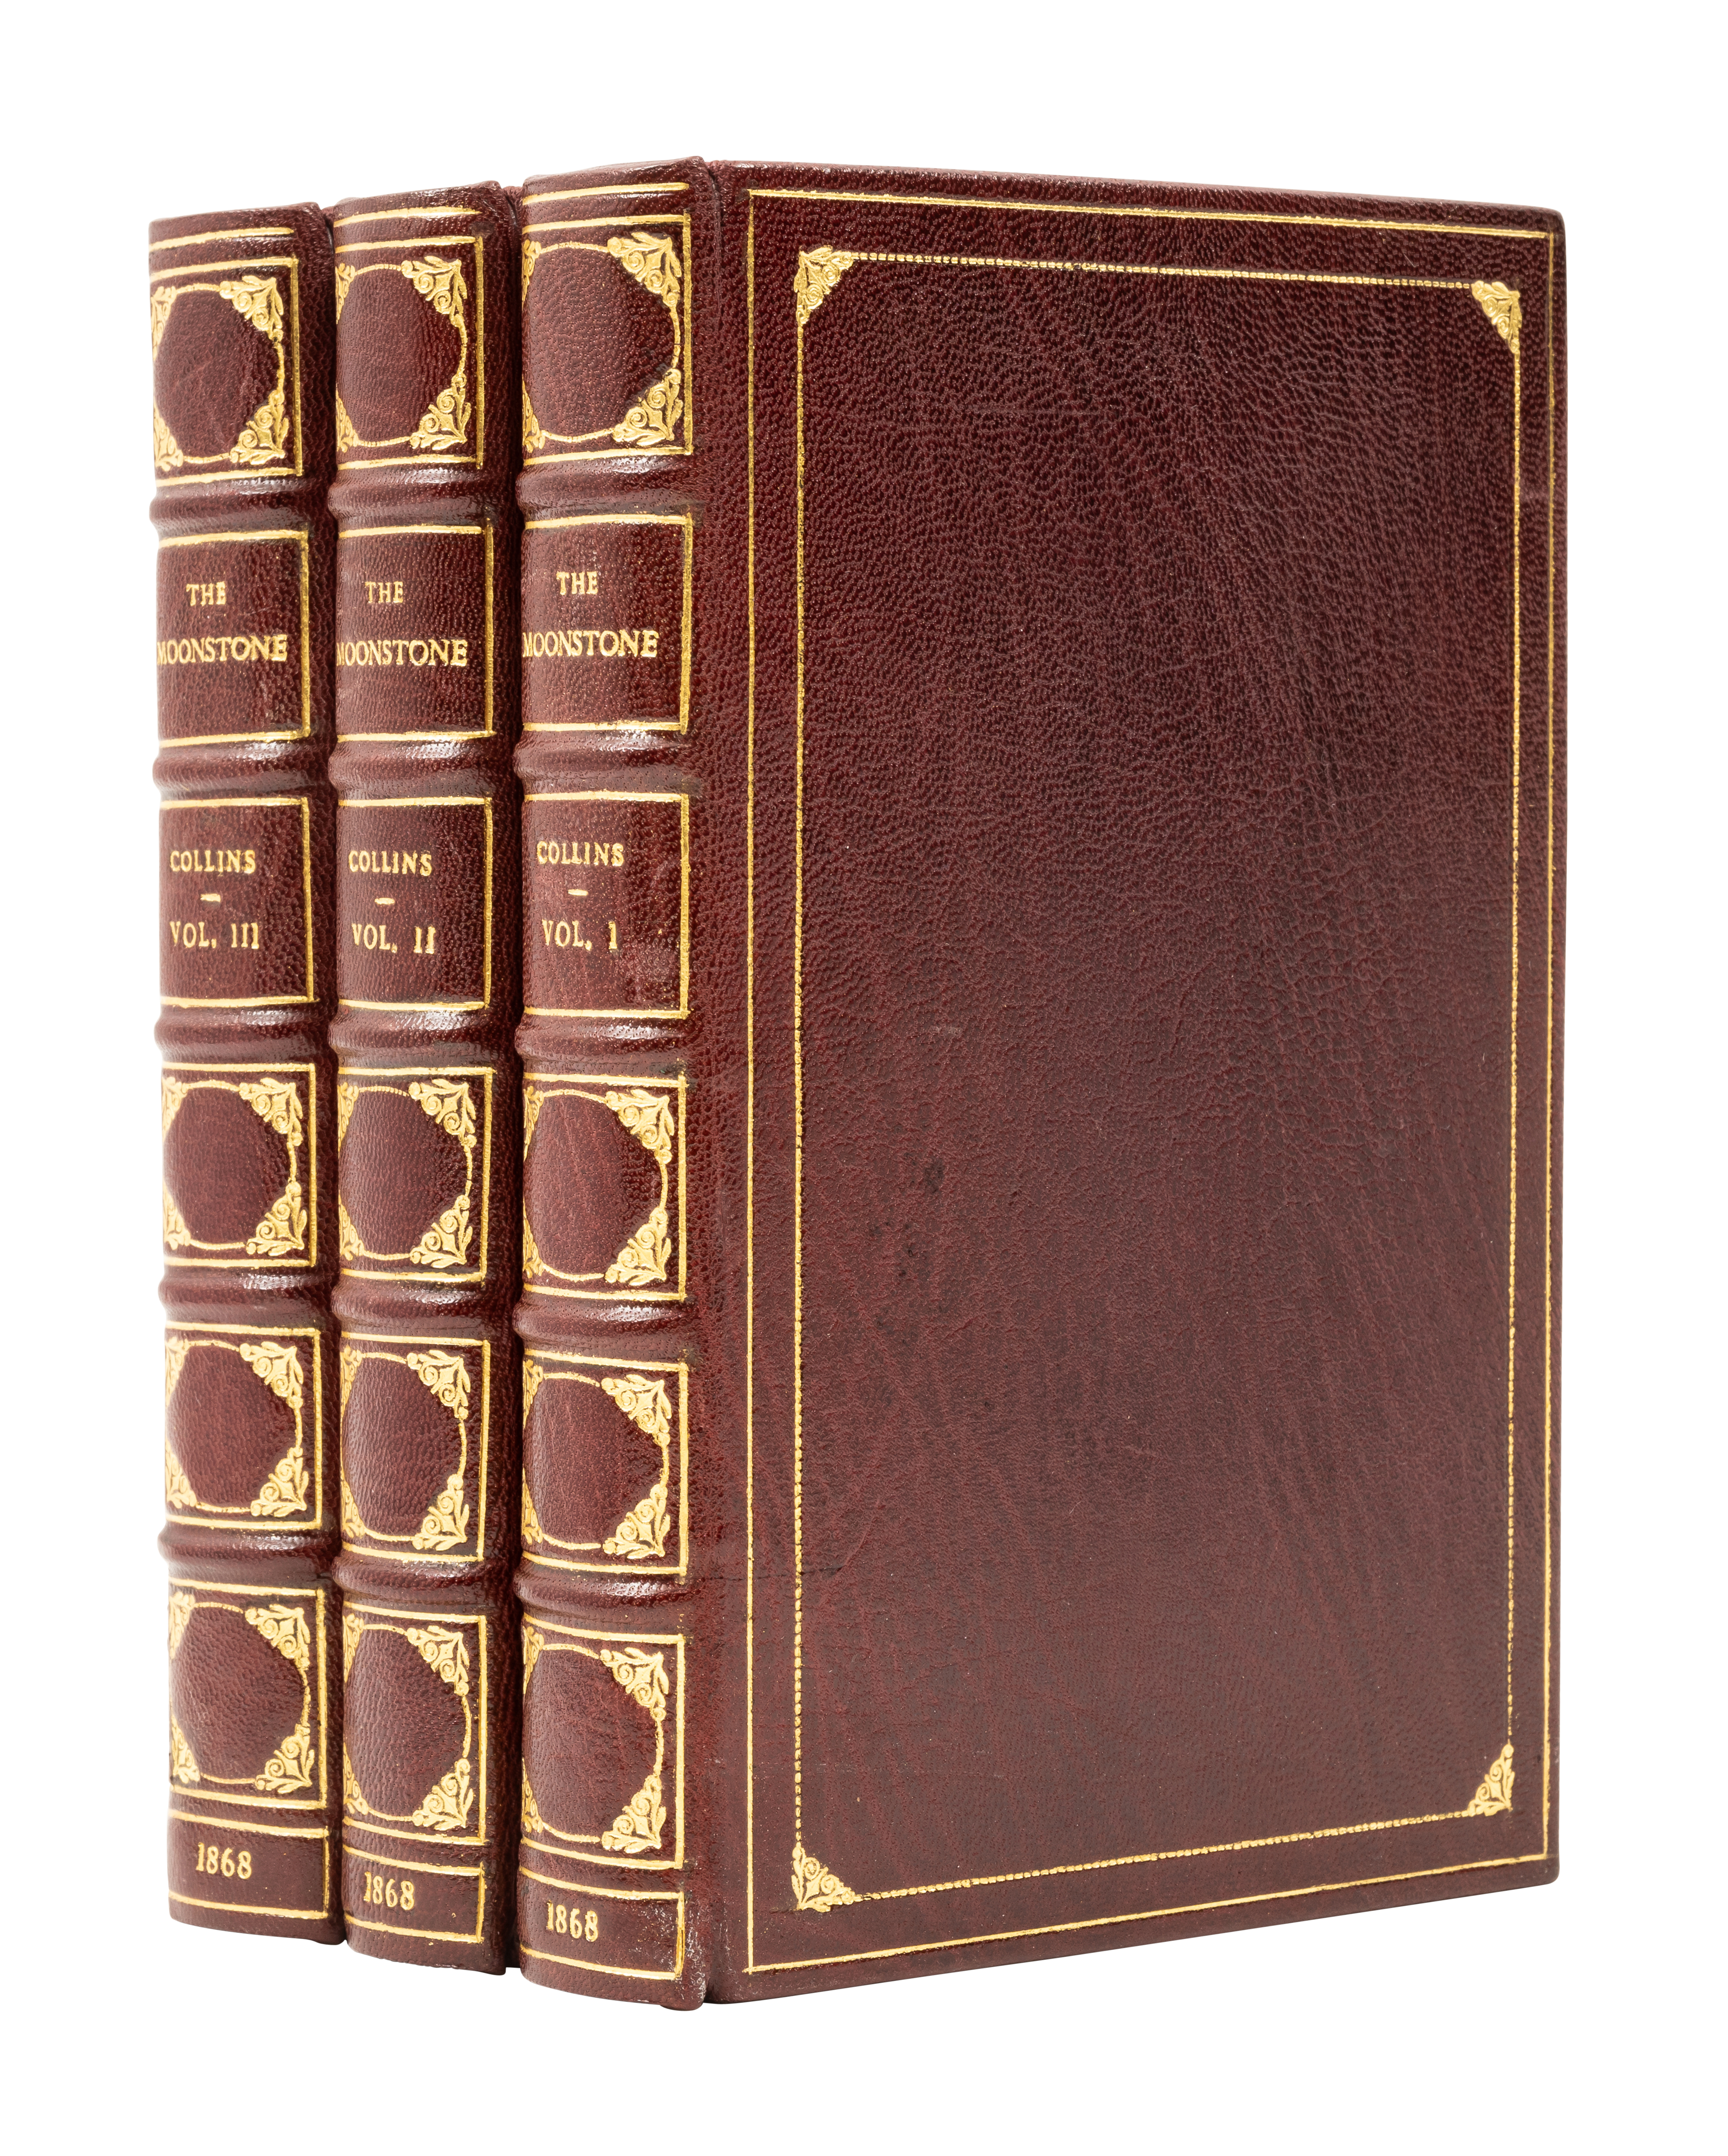 Collins (Wilkie) The Moonstone. A Romance, 3 vol., first edition, Tinsley Brothers, 1868.